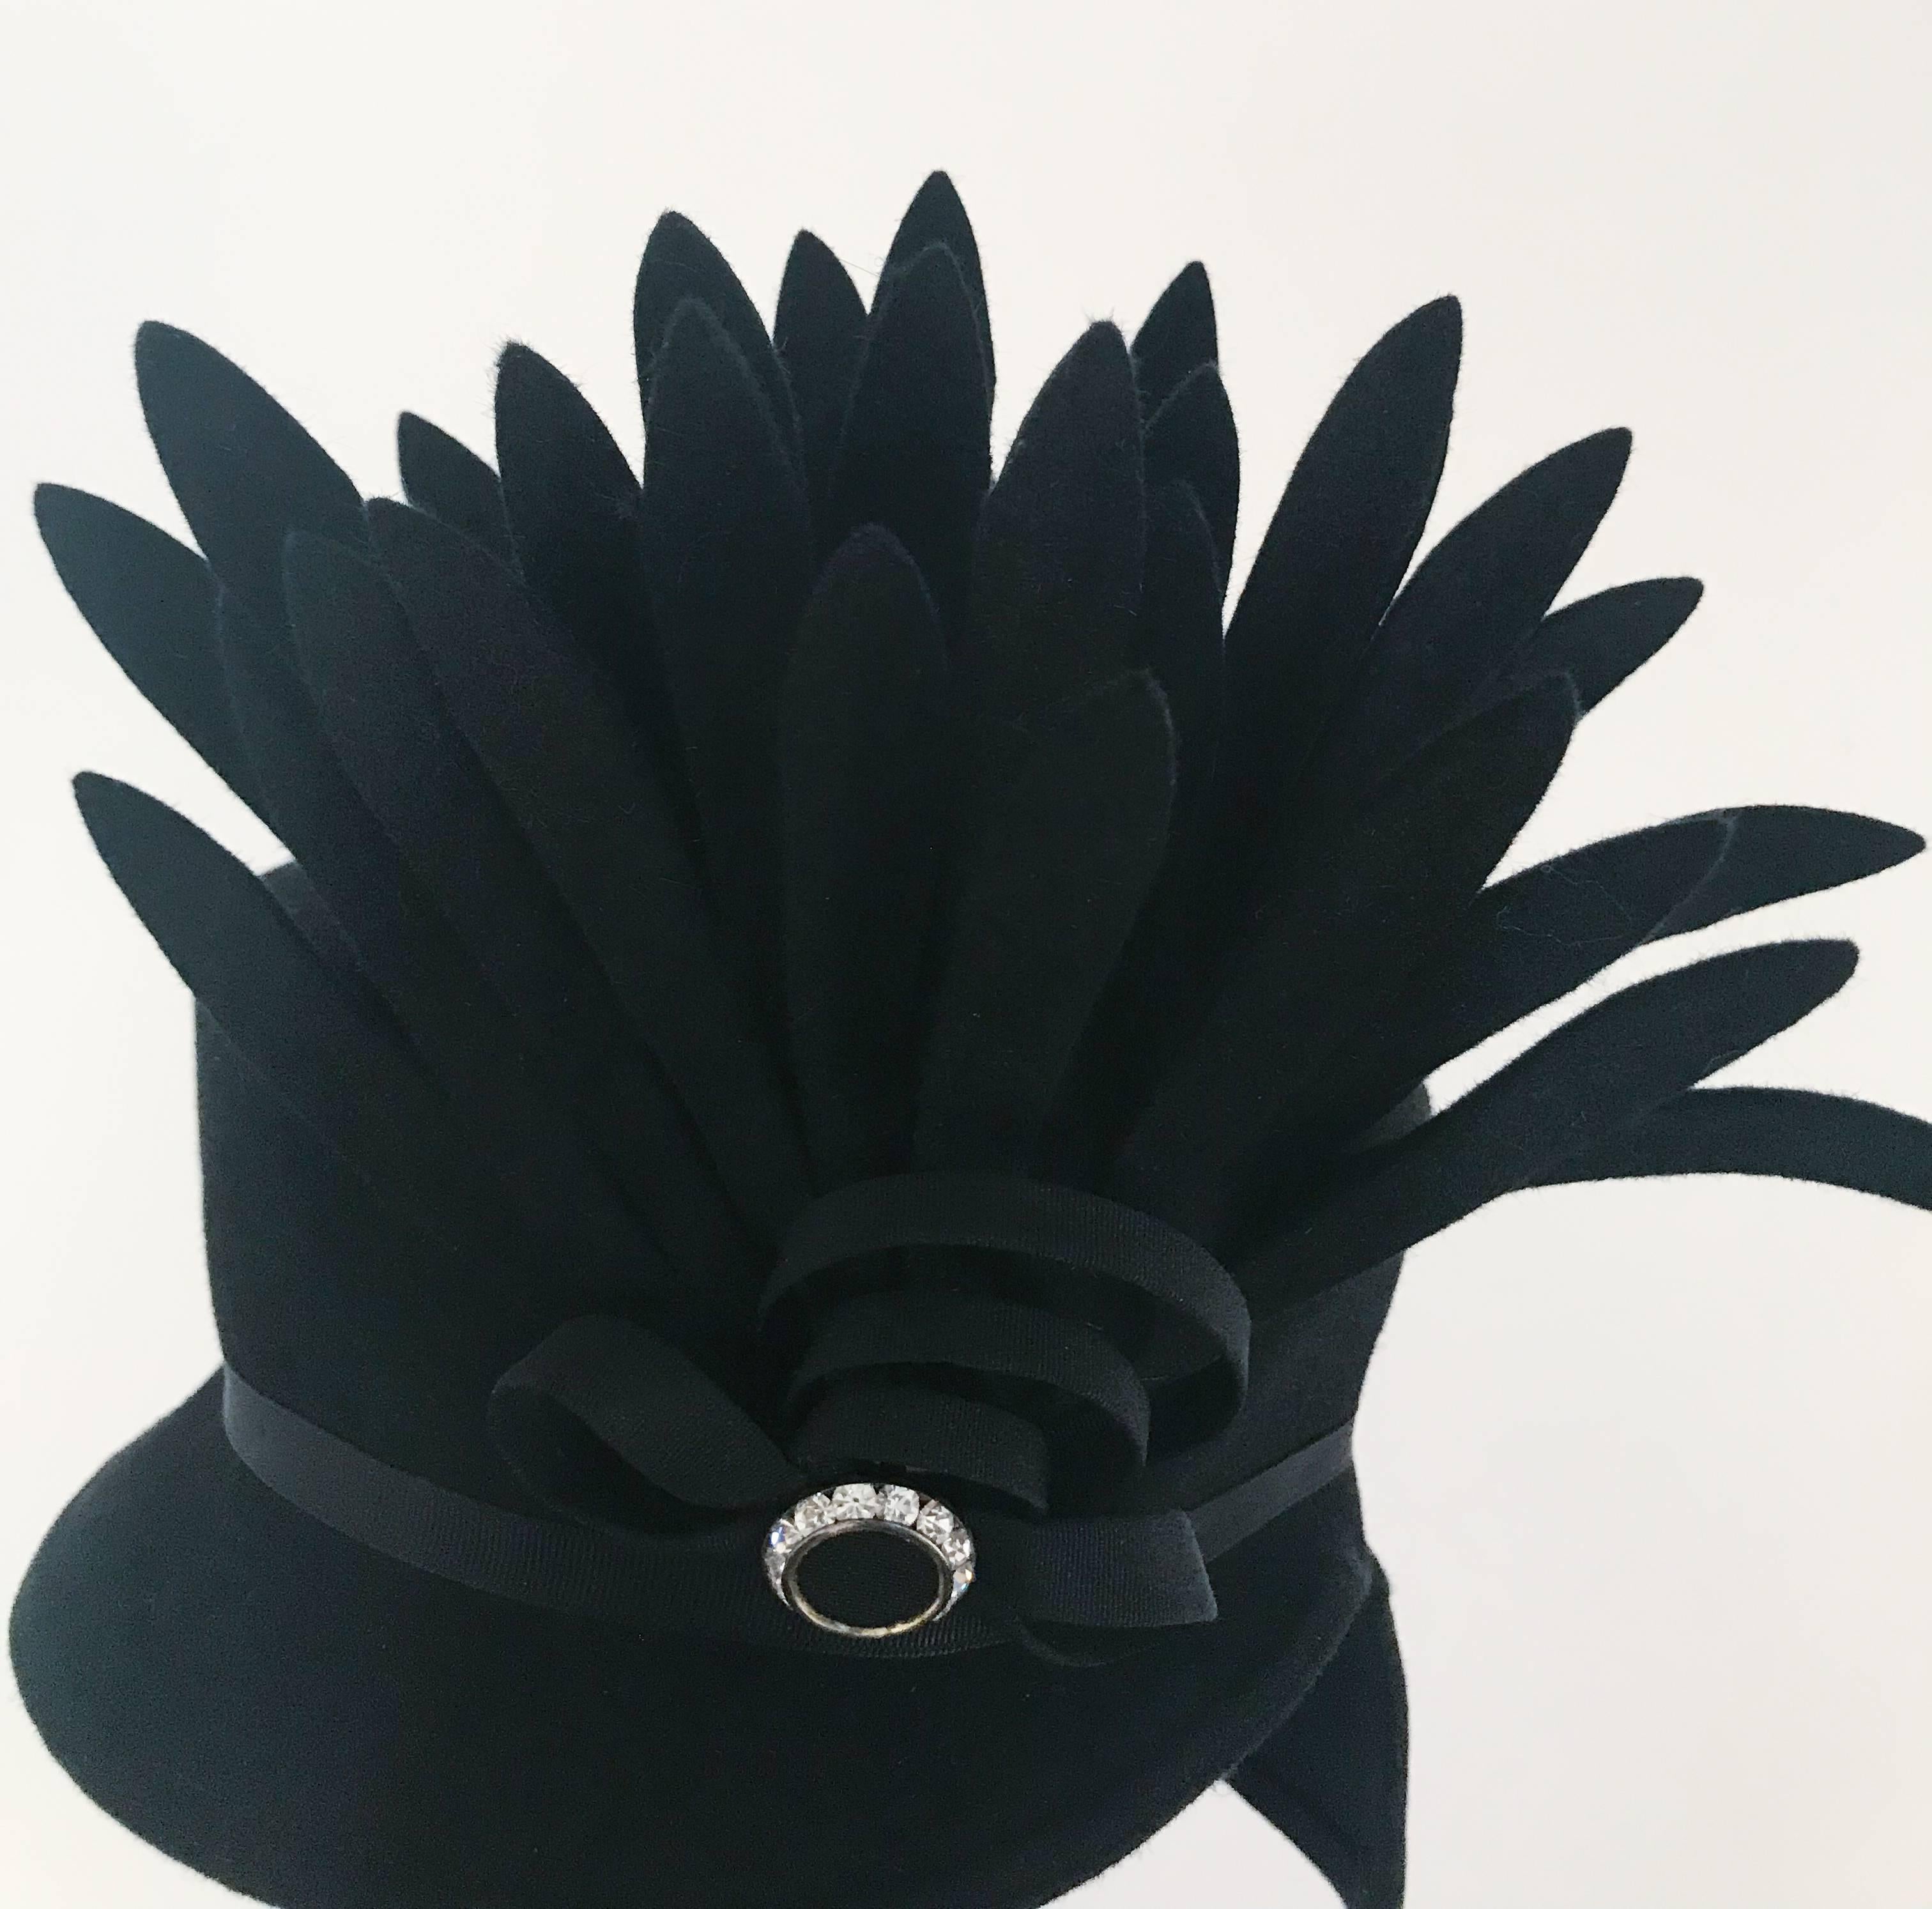 1940s Black Felt Toy Hat w/ Cut Feather Flourish. Toy hat perches towards side of head, rhinestone buckle decorates hatband while a delightful cascade of cut felt feathers embellish the side of the hat. Held to hat with elastic band at nape of neck. 